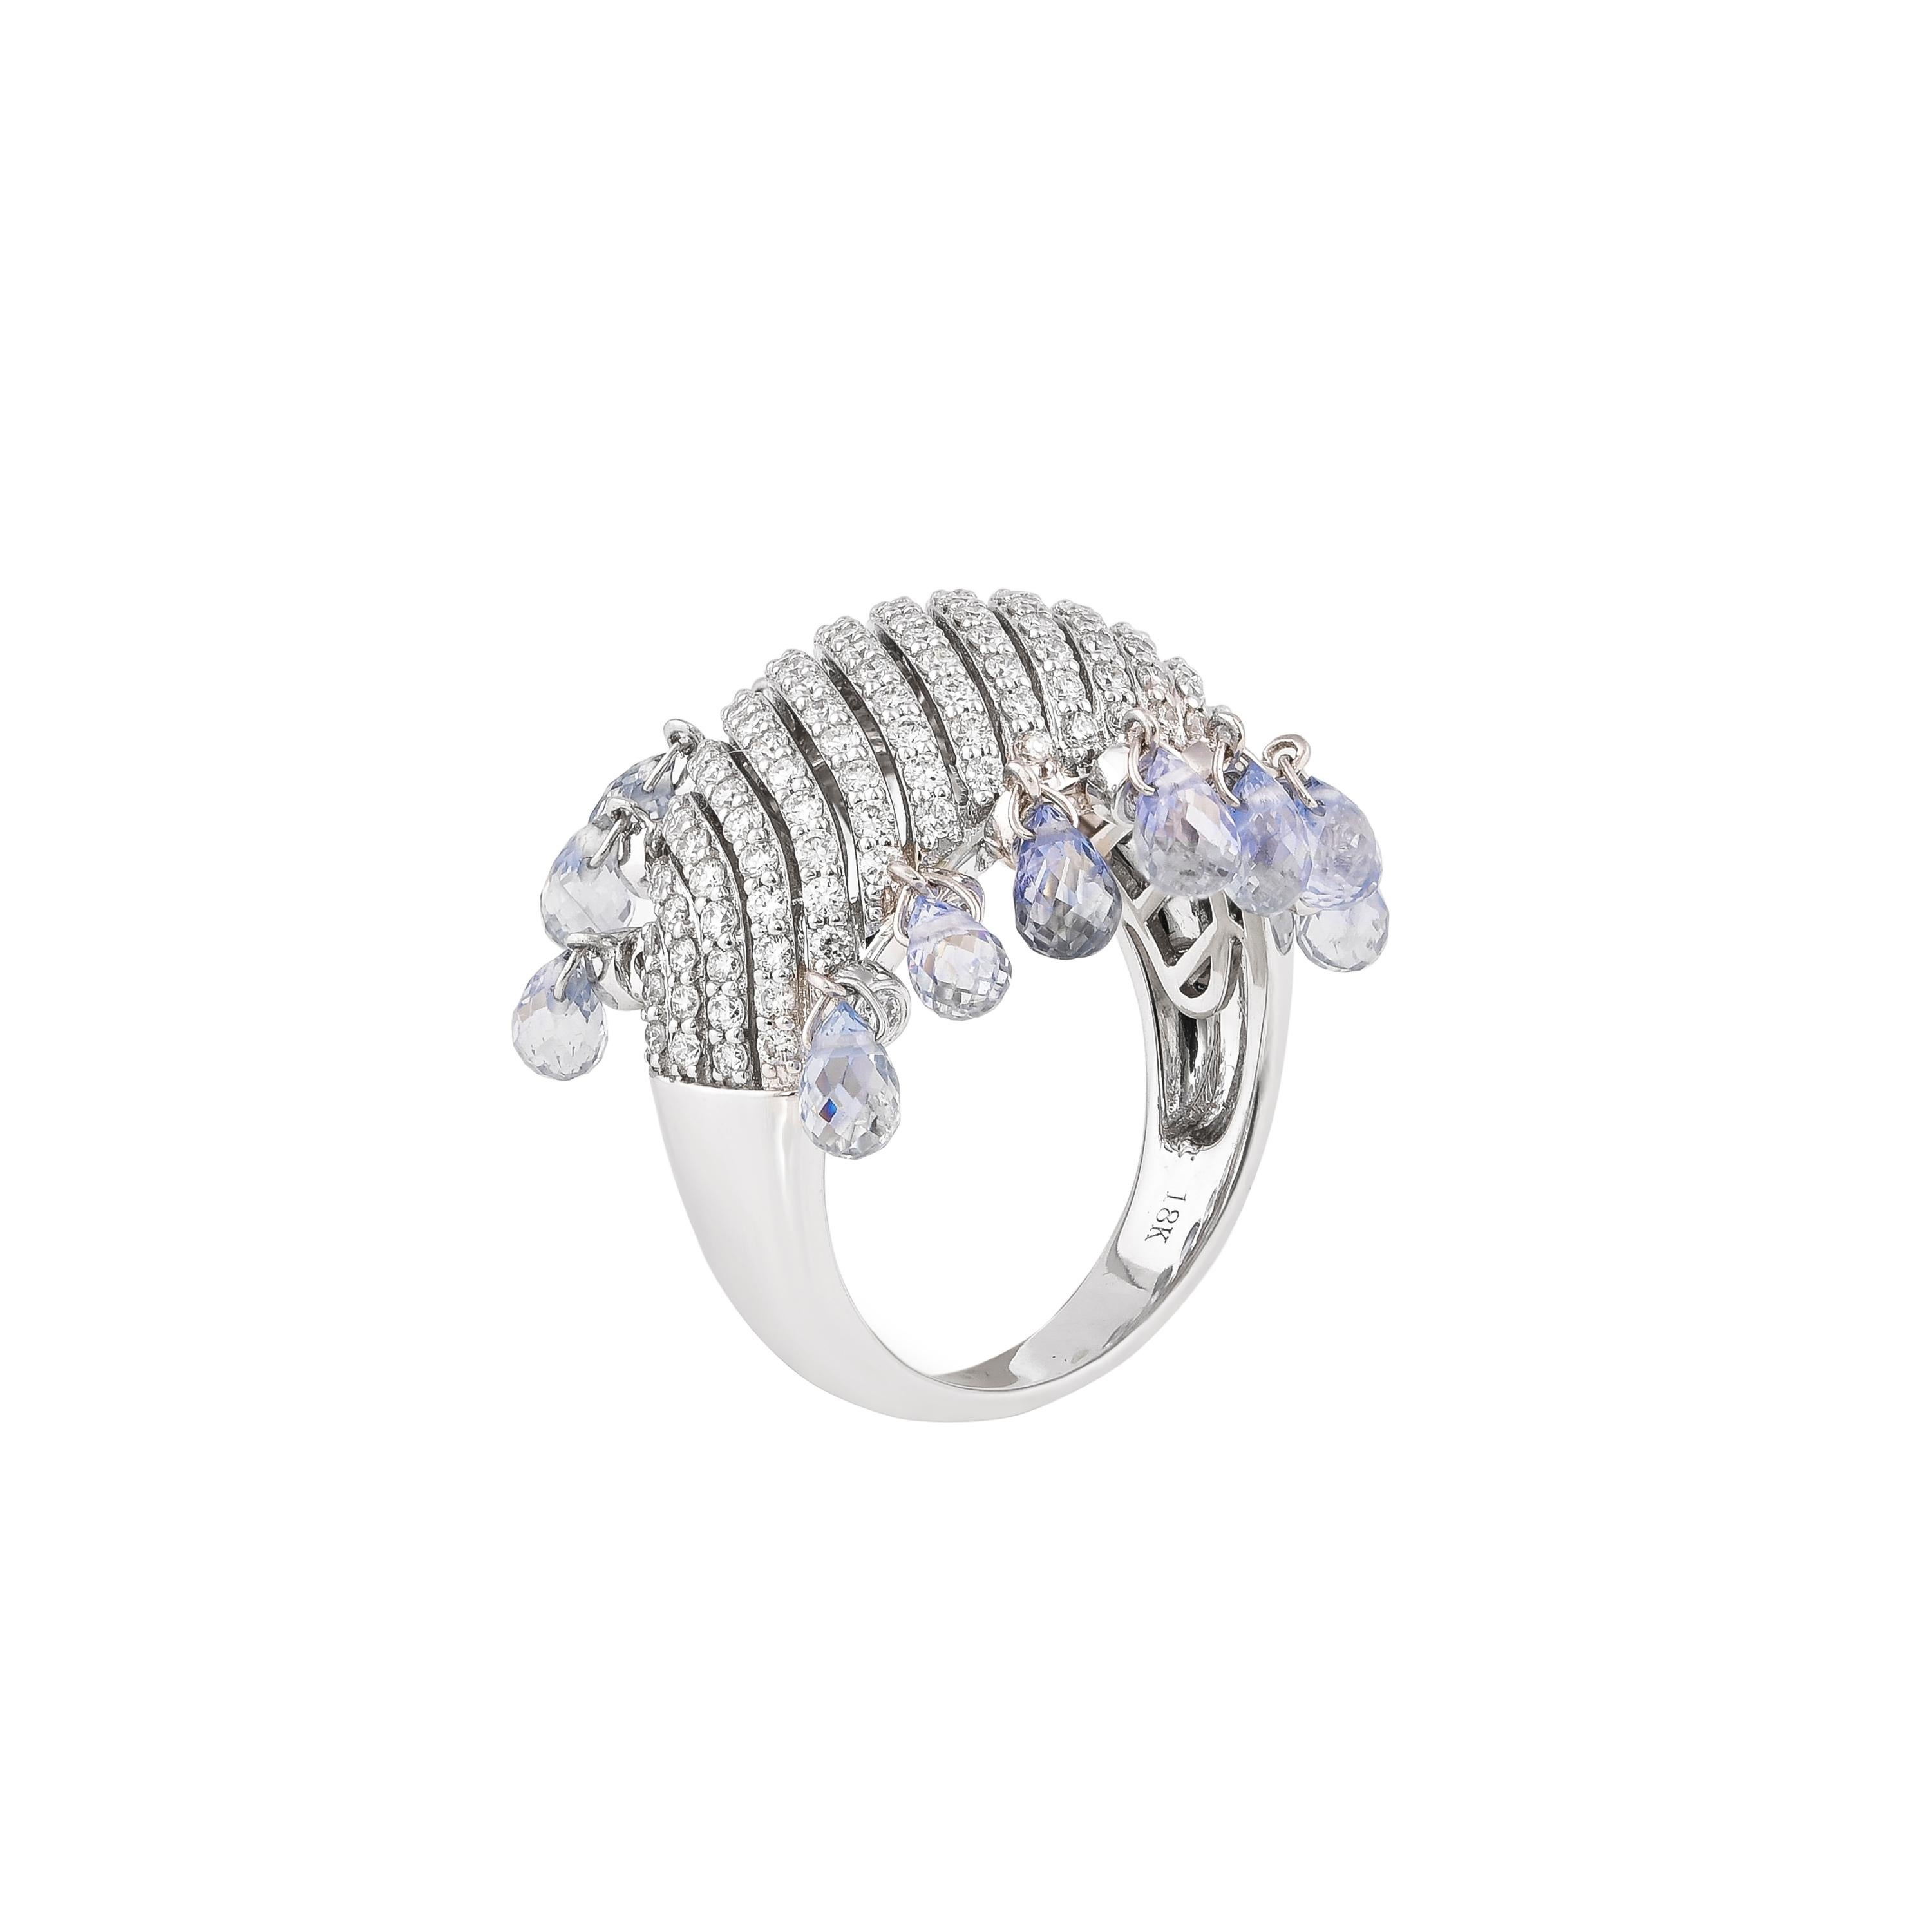 There is a reason why diamonds are a girl’s best friend, and it’s because there is never a wrong occasion to accessorize with diamond jewelry. This diamond collection showcases elegant pieces that are accented with blue sapphire and makes these